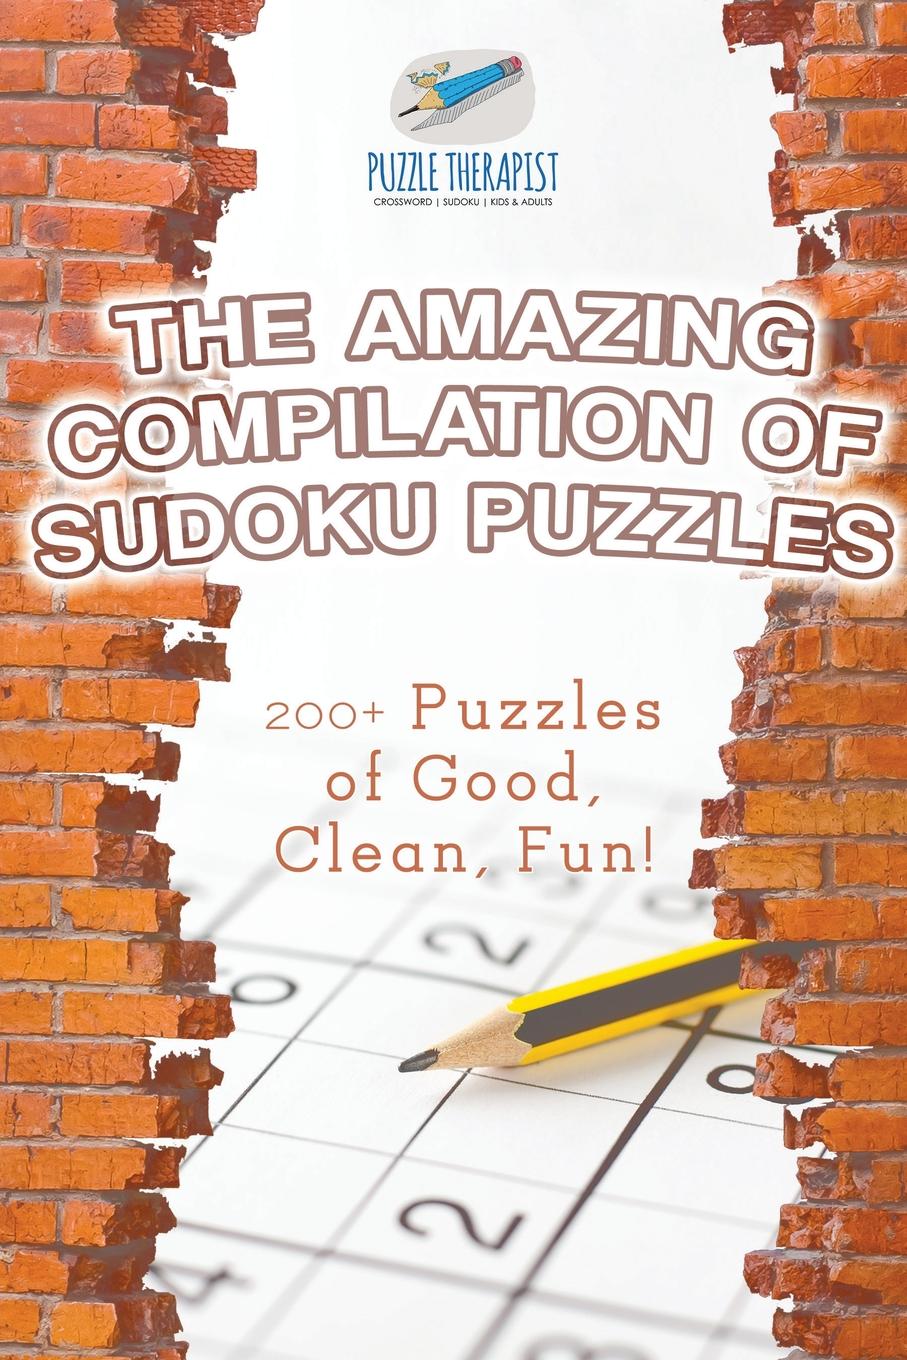 Puzzle Therapist The Amazing Compilation of Sudoku Puzzles . 200. Puzzles of Good, Clean, Fun.